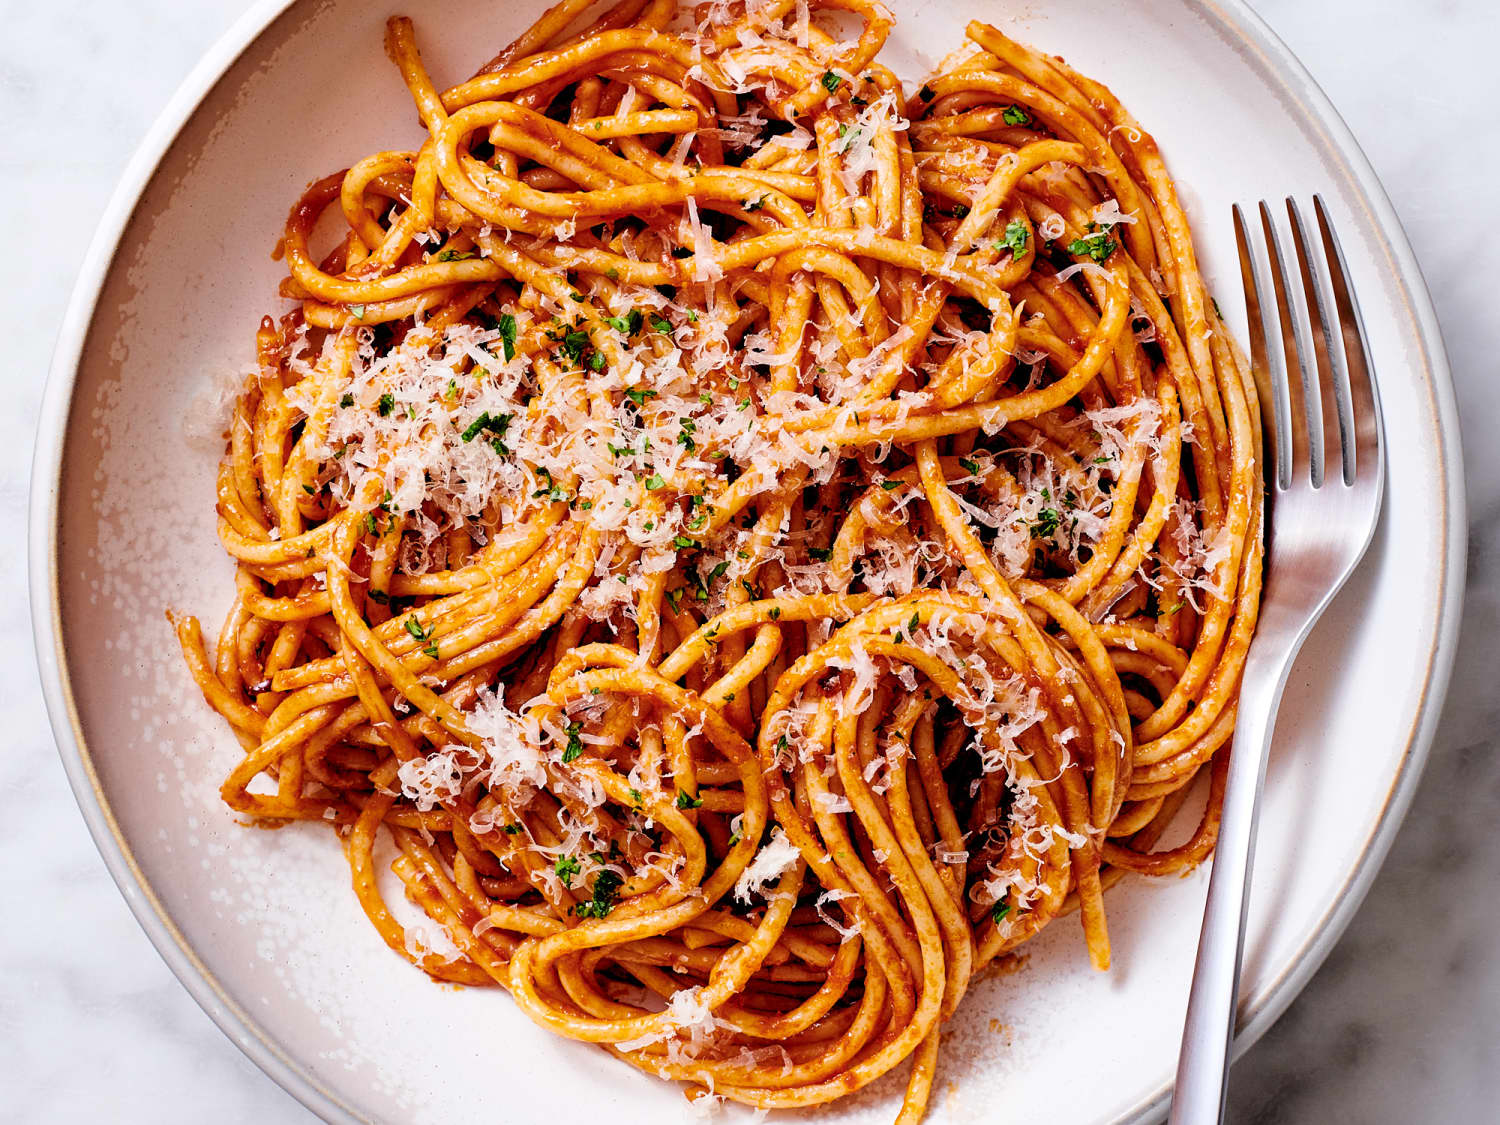 Ina's Arrabbiata Sauce Is the Perfect Pandemic Pantry Recipe